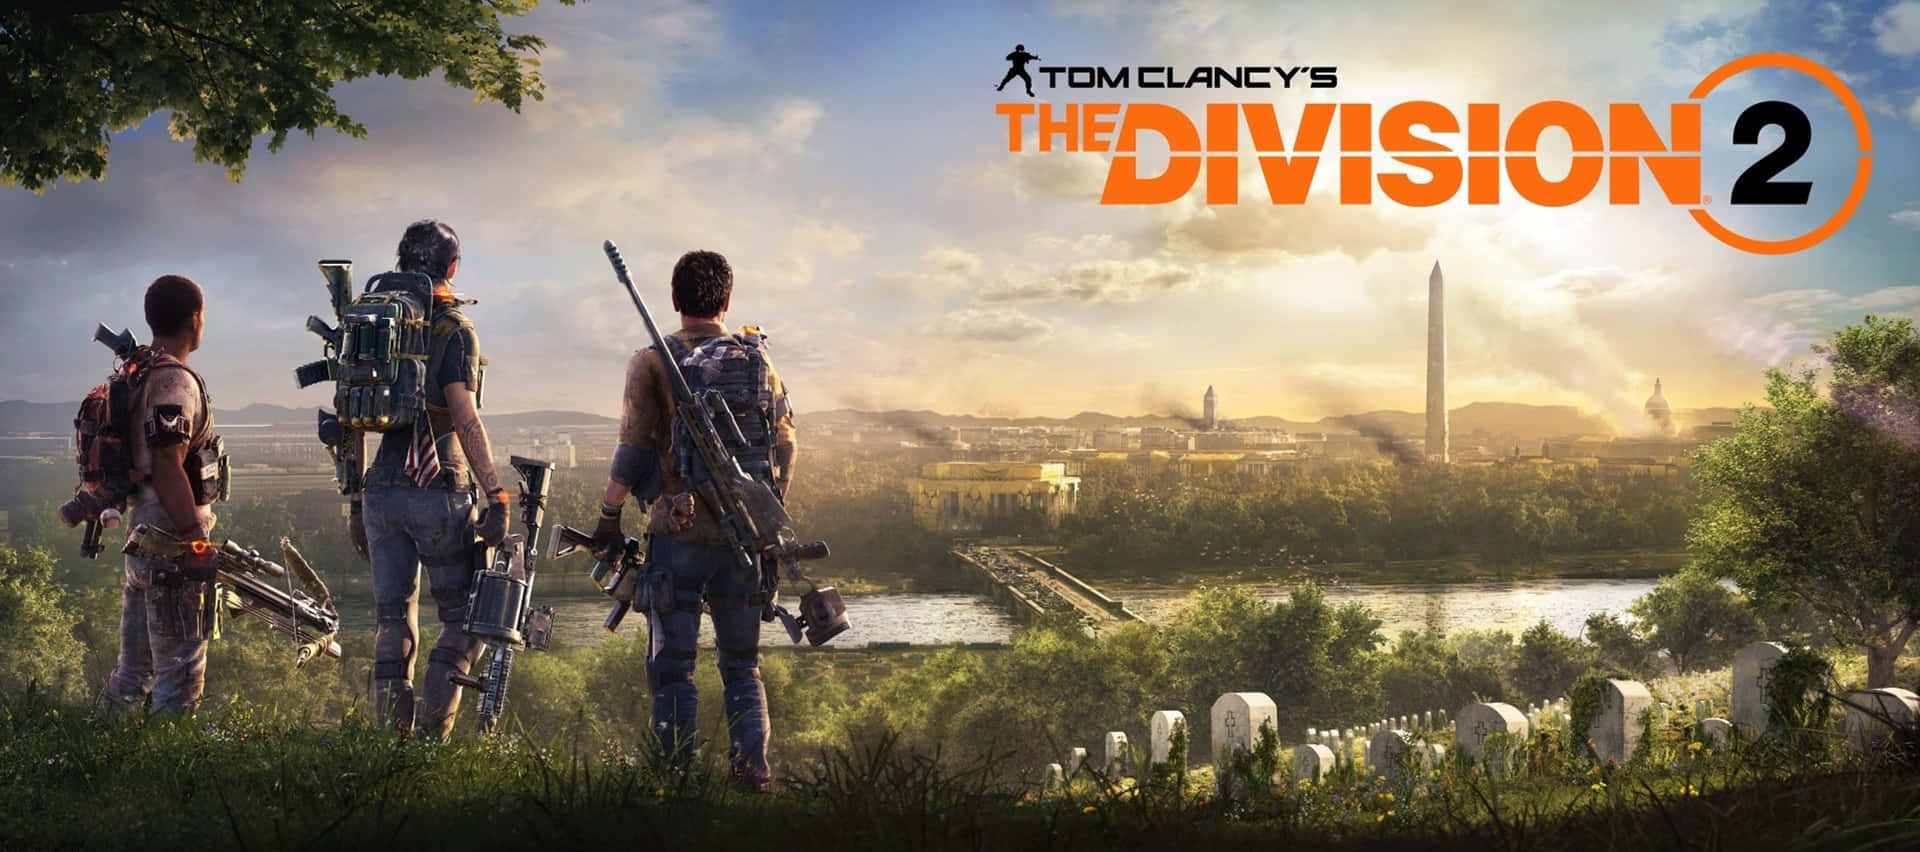 Experience an Open-World Adventure in The Division 2 4K Wallpaper